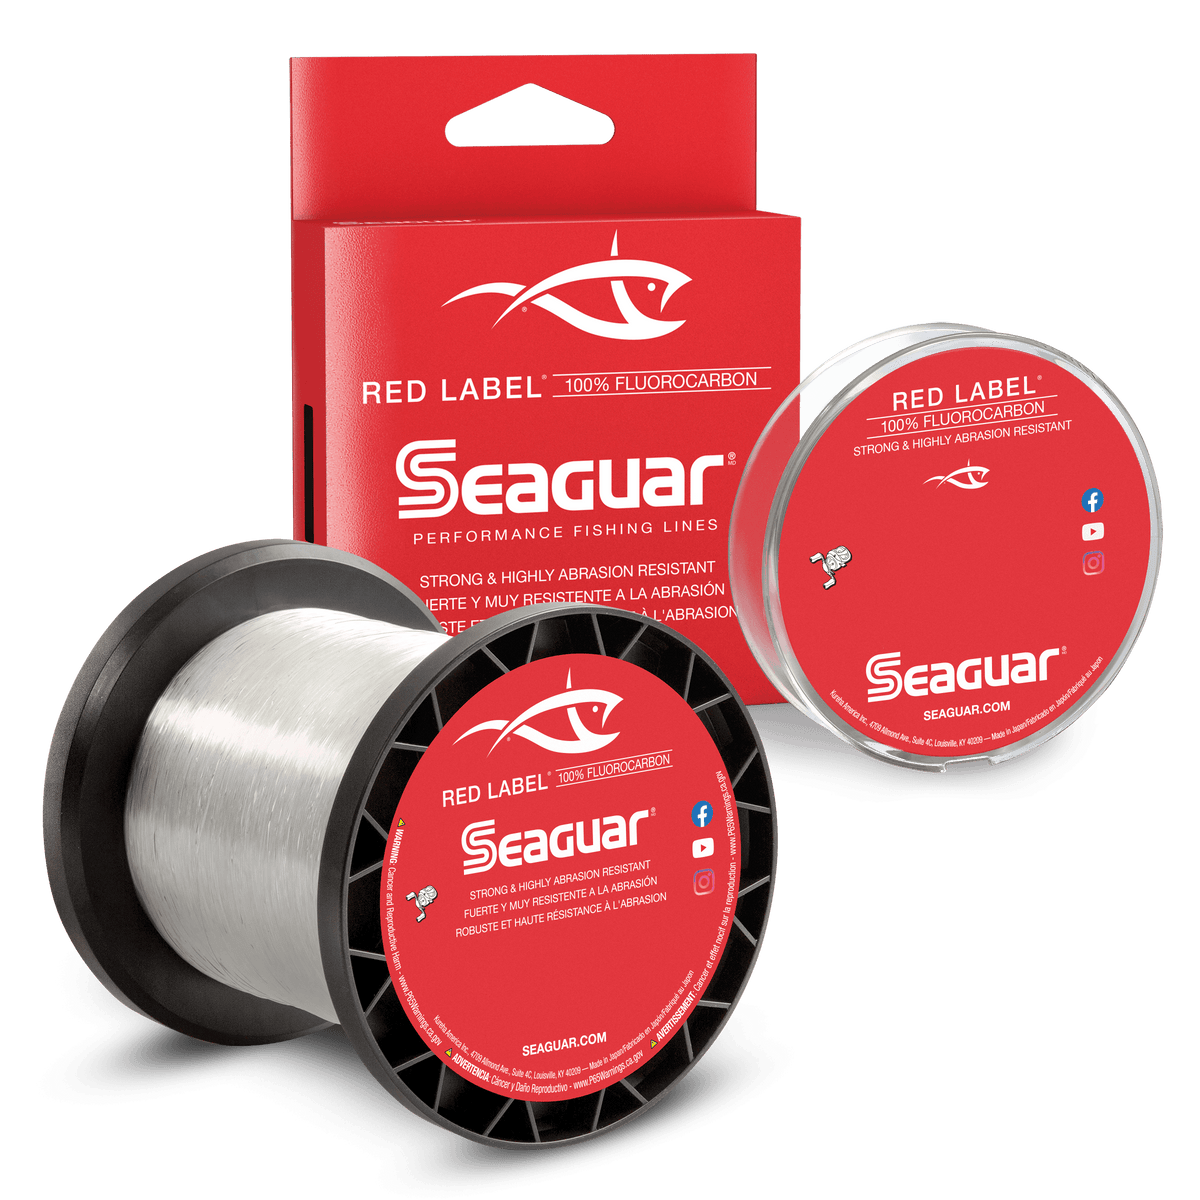 Seaguar Invizx 100% Fluorocarbon Fishing Line Clear CHOOSE YOUR LINE WEIGHT!